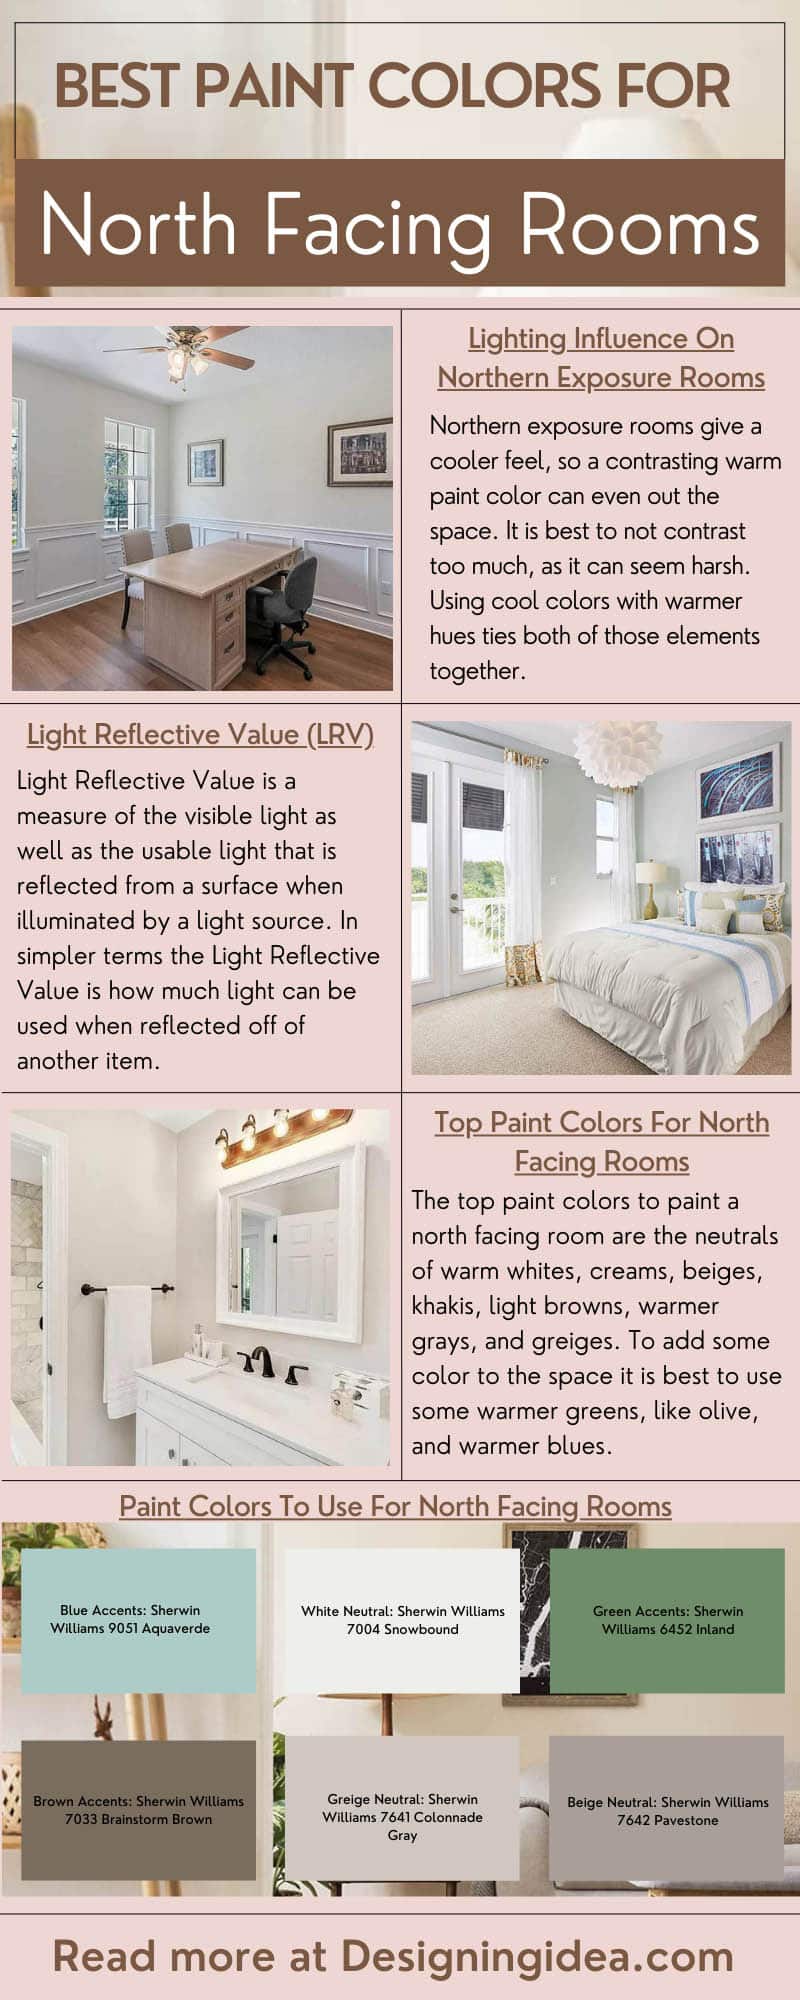 Best Paint Colors For North Facing Rooms Infographic